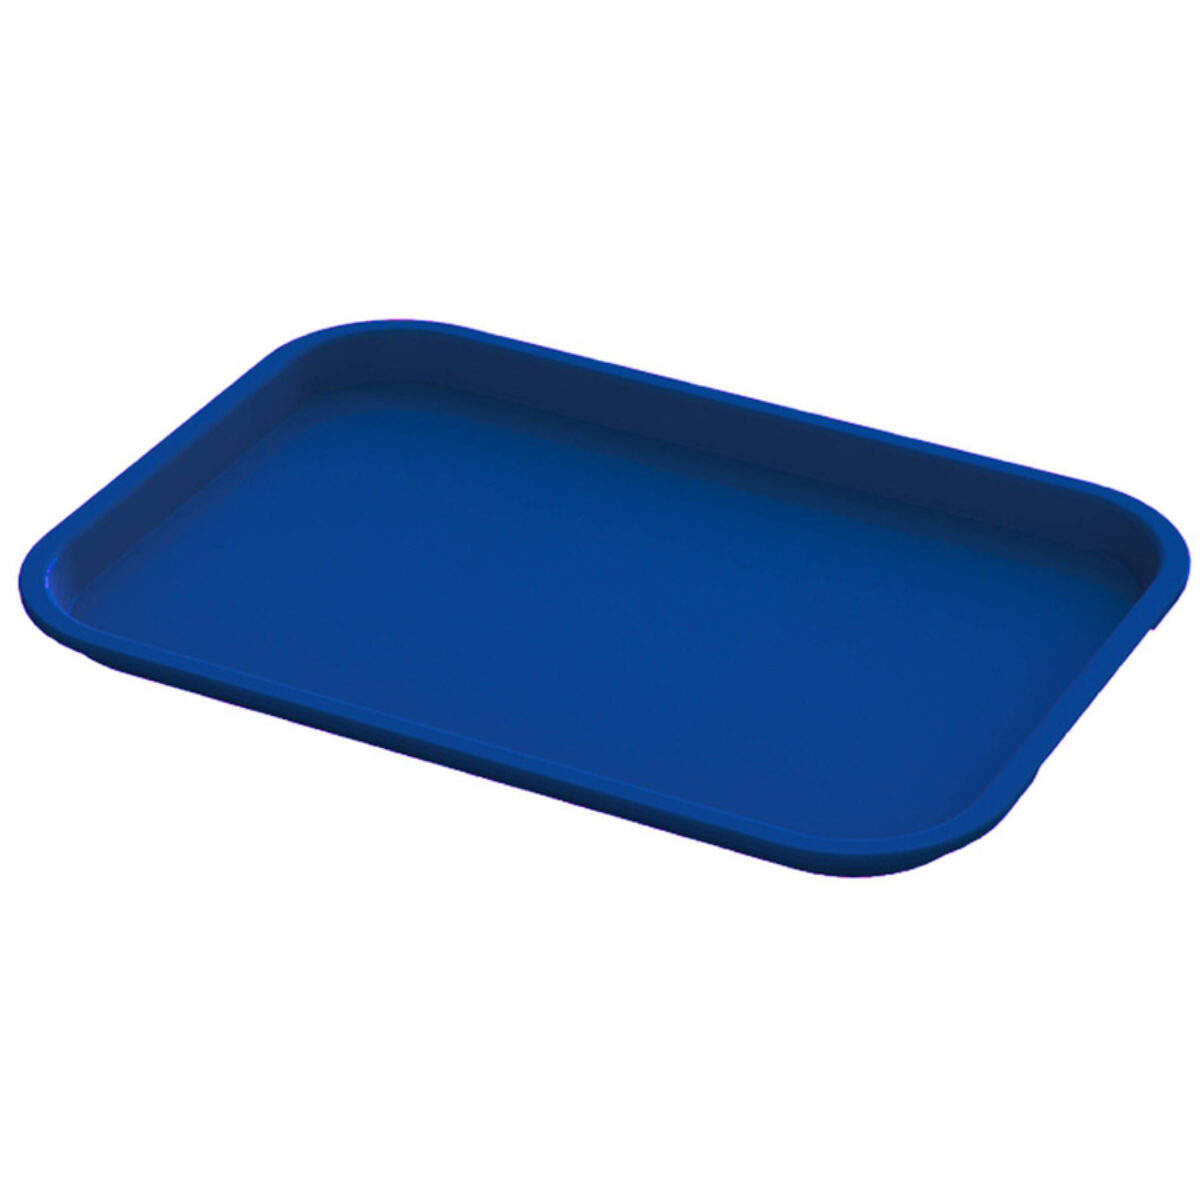 10 x 14 Black Rectangular Plastic Restaurant Serving Trays,  NSF-Certified, Fast Food Tray, 12/Pack